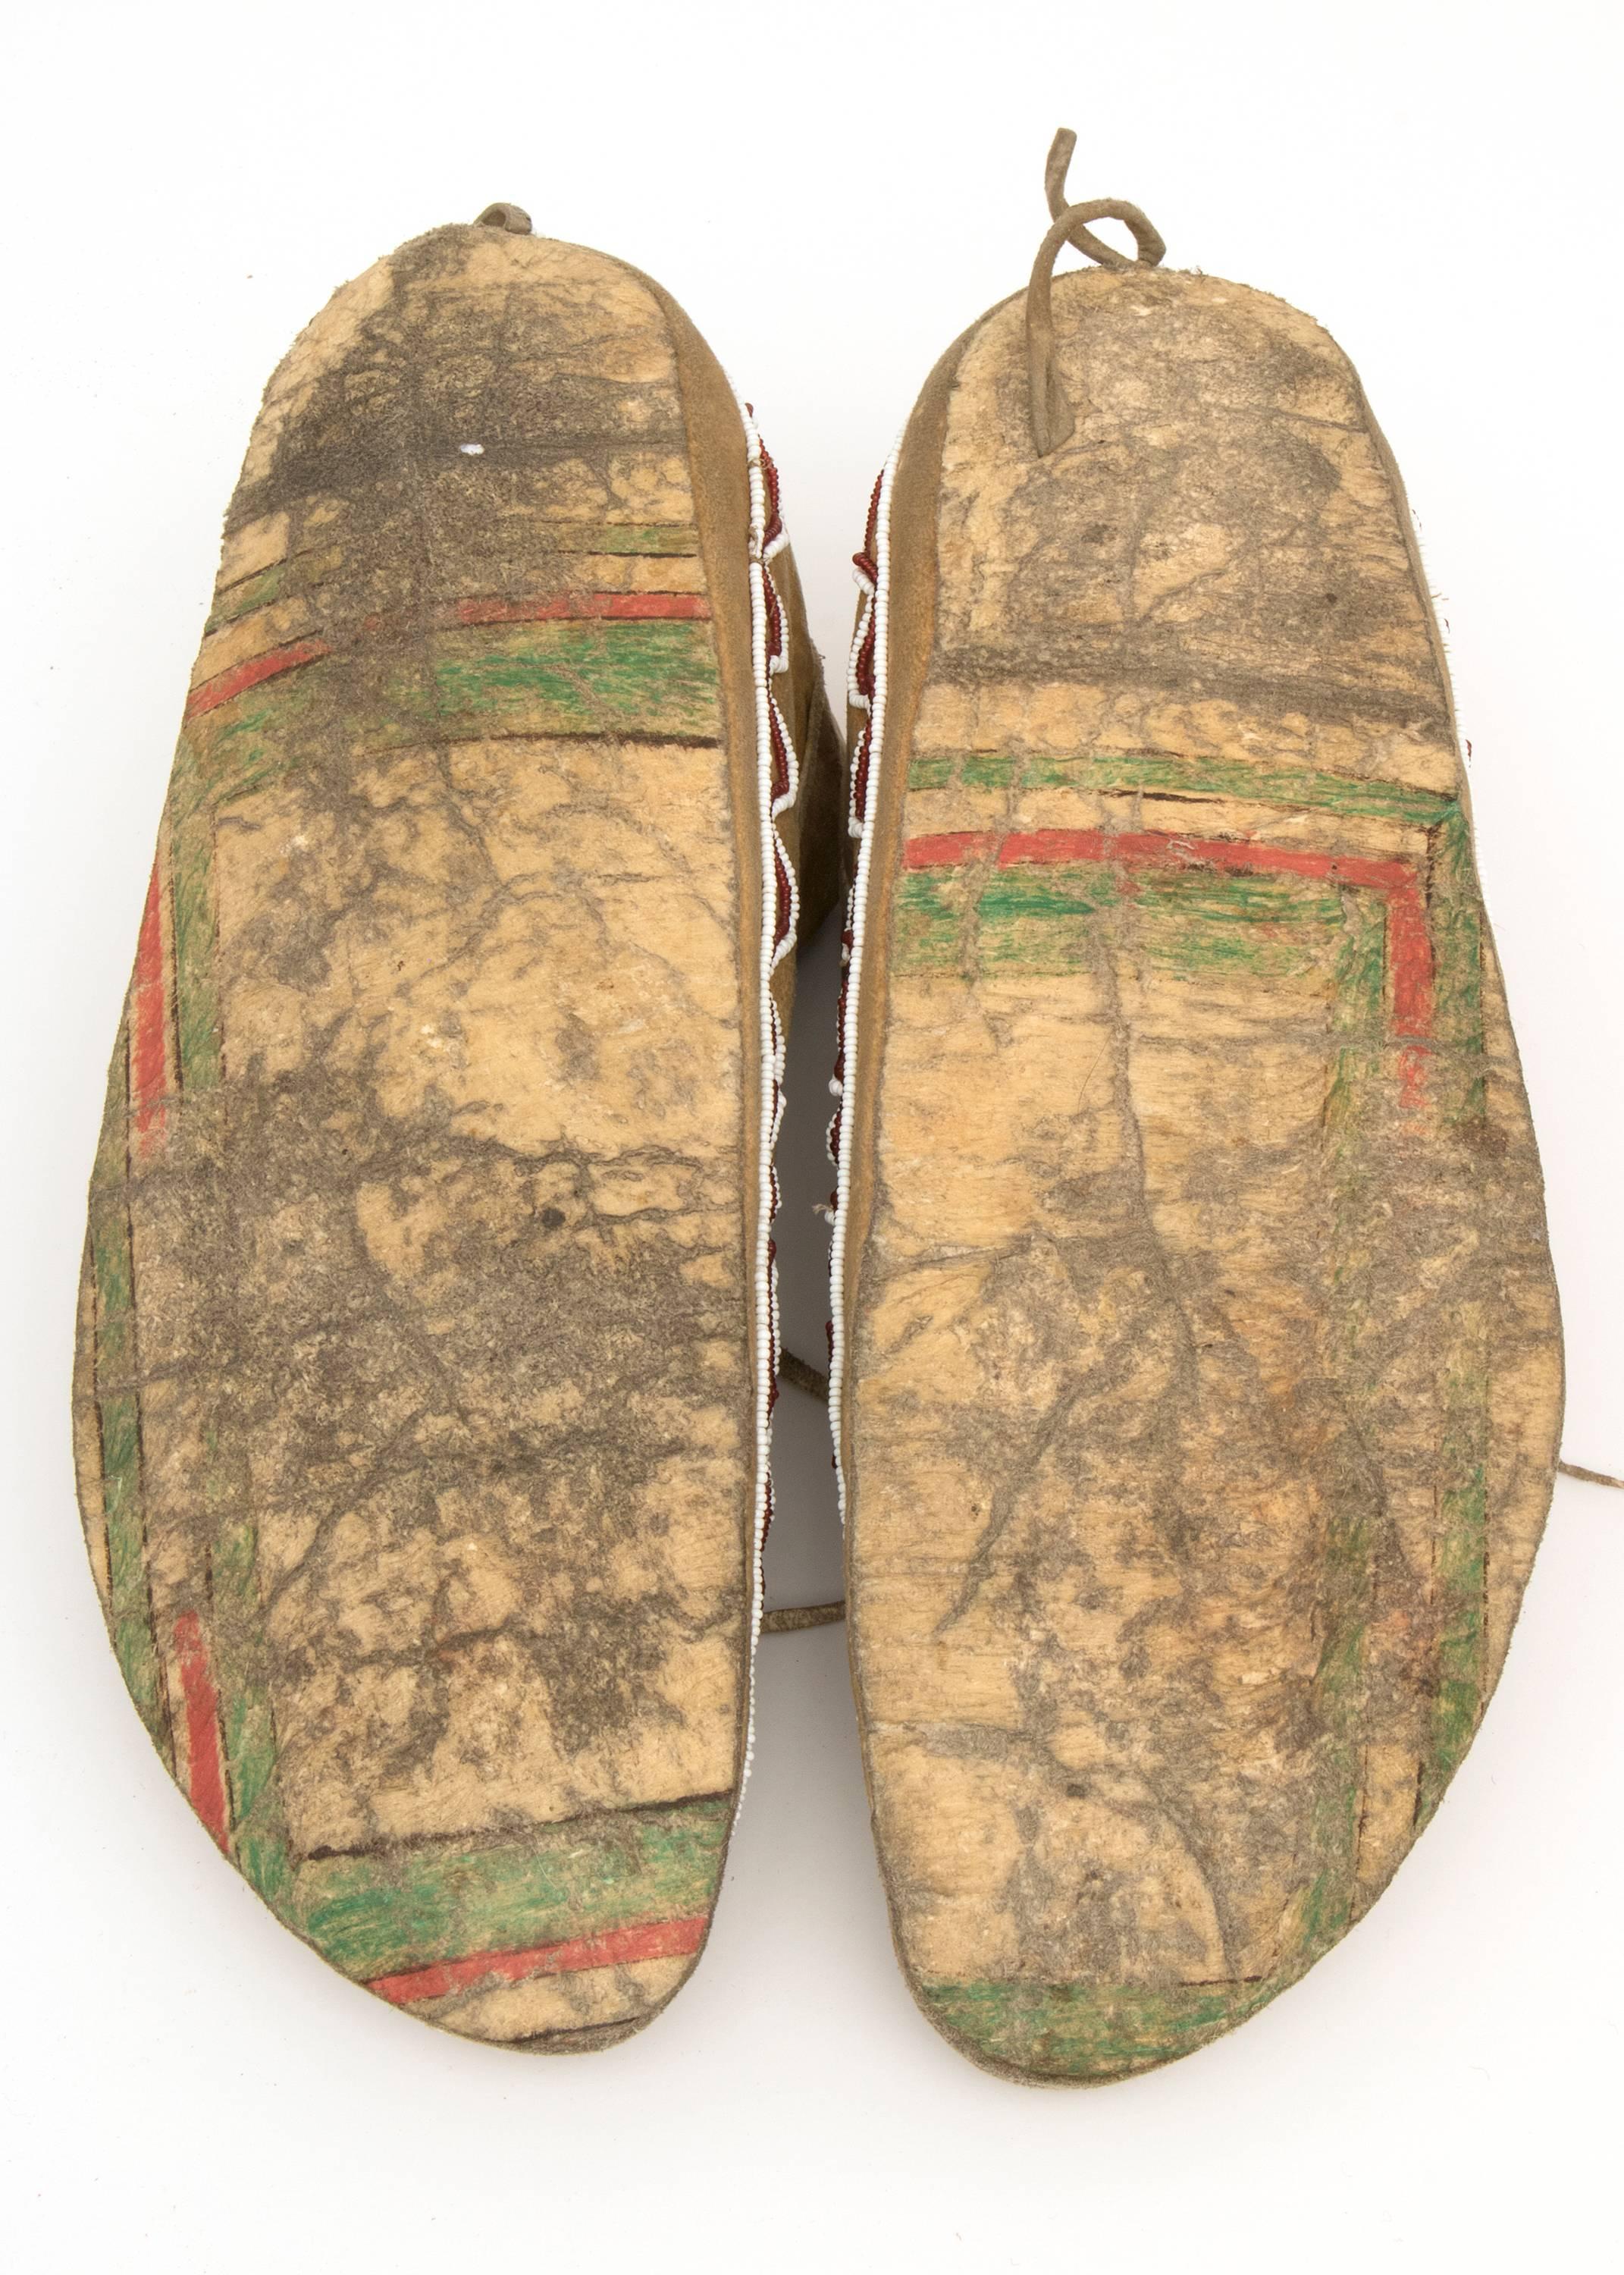 Constructed of native tanned hide and artfully beaded with blue, white and red trade beads; the maker recycled portions of painted parfleche for the soles. Each moccasin measures 10.75 x 3.75 x 4.75 inches. 

The Kiowa, a nomadic tribe of the